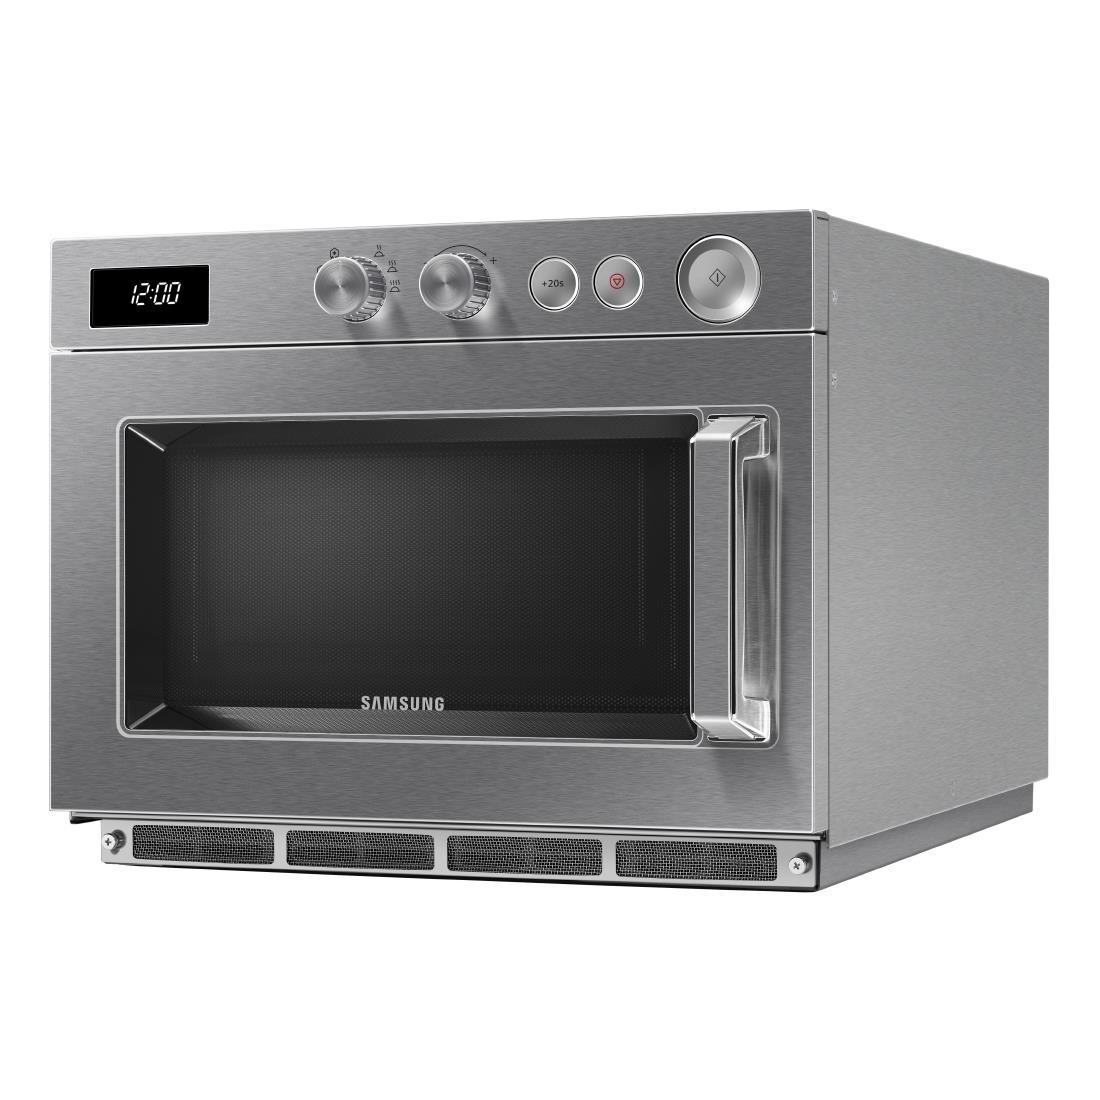 Samsung Commercial Microwave Manual 26Ltr 1850W - FS315  - 2